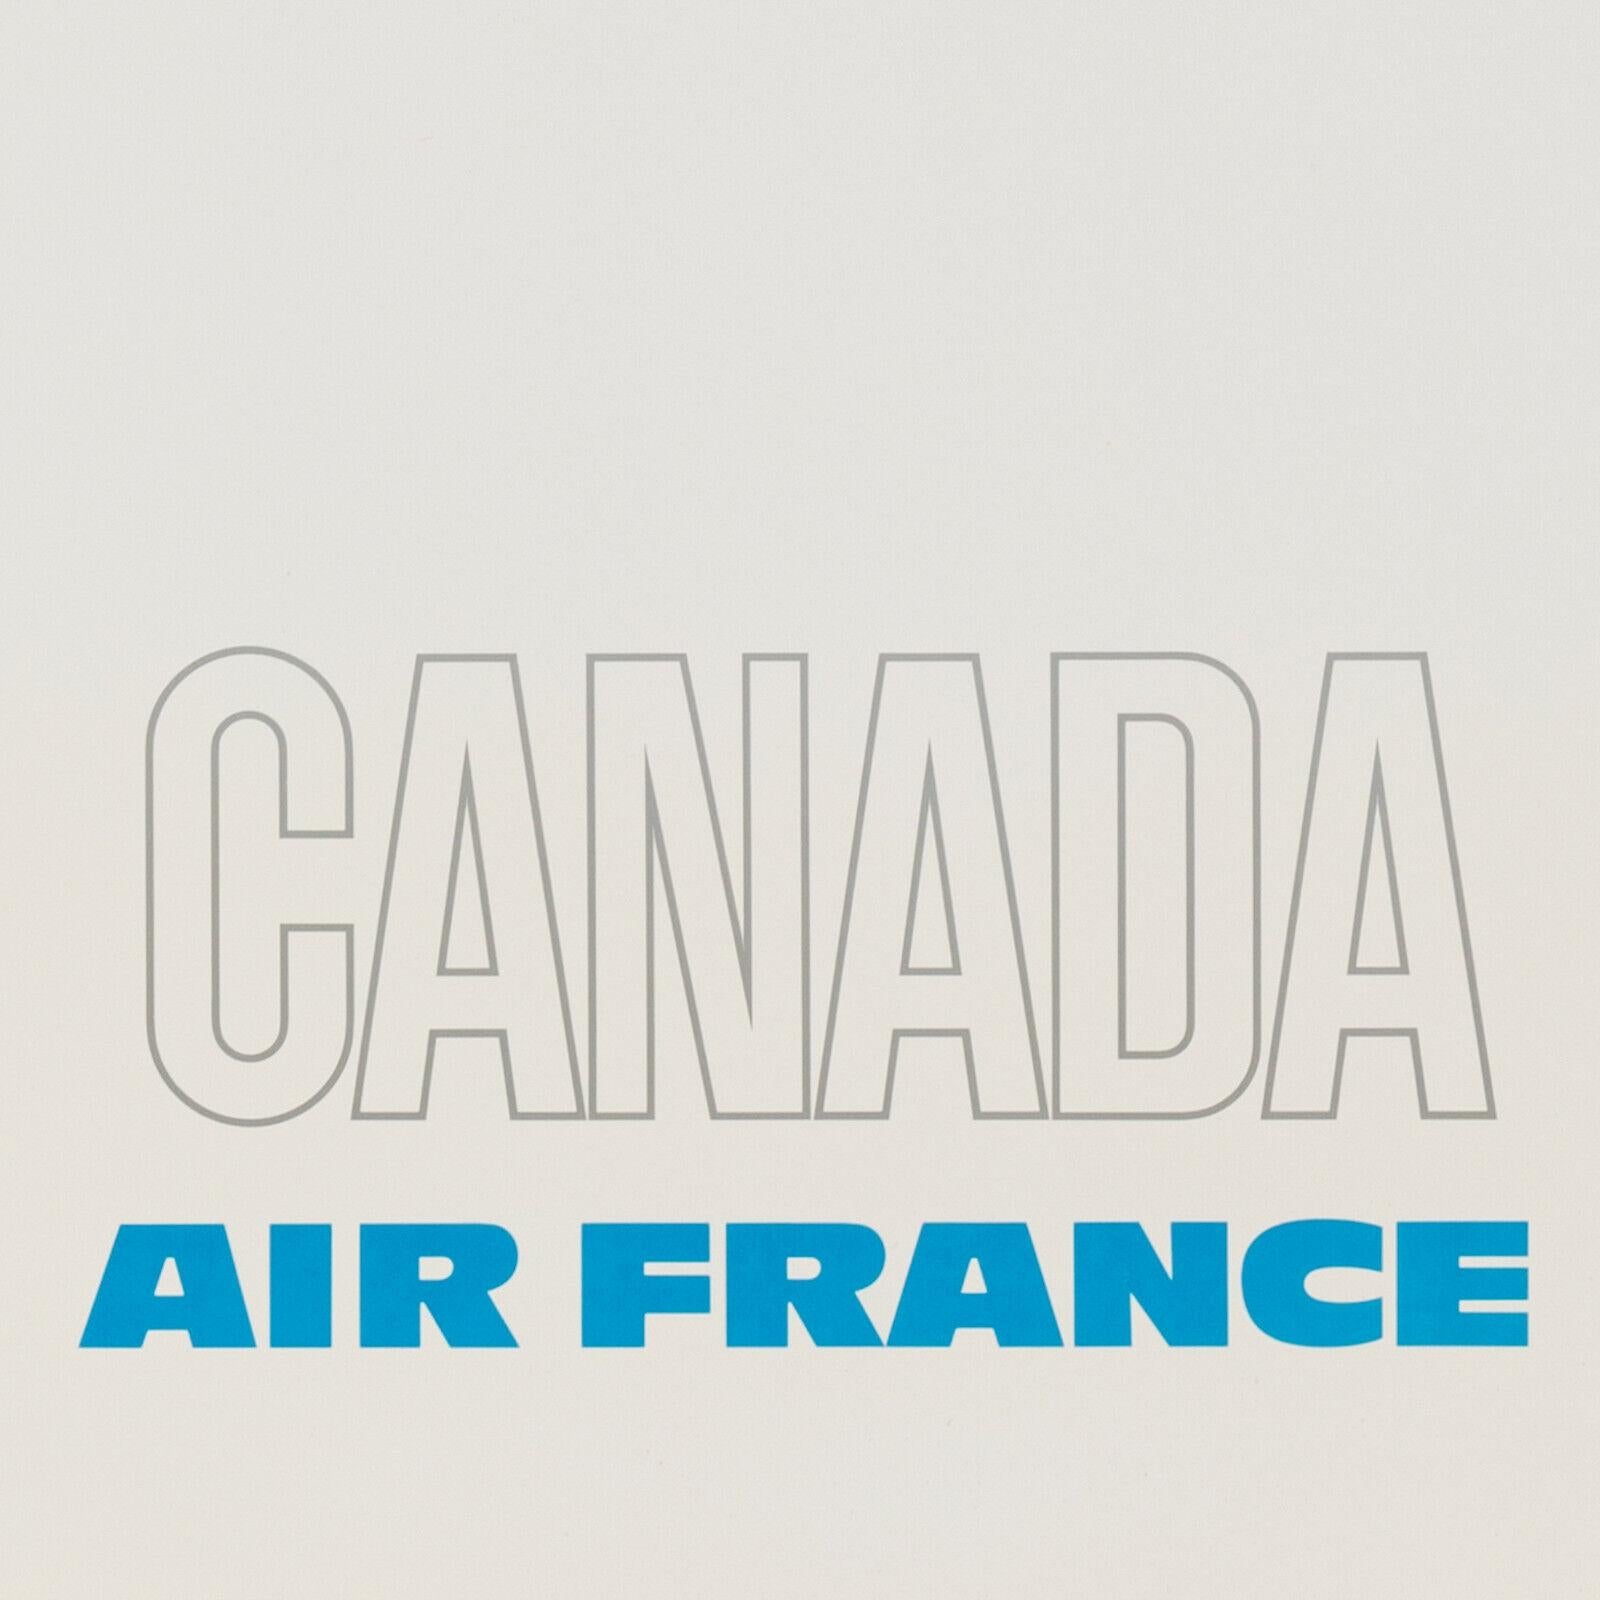 French Raymond Pages, Original Vintage Airline Poster, Air France, Canada, 1971 For Sale